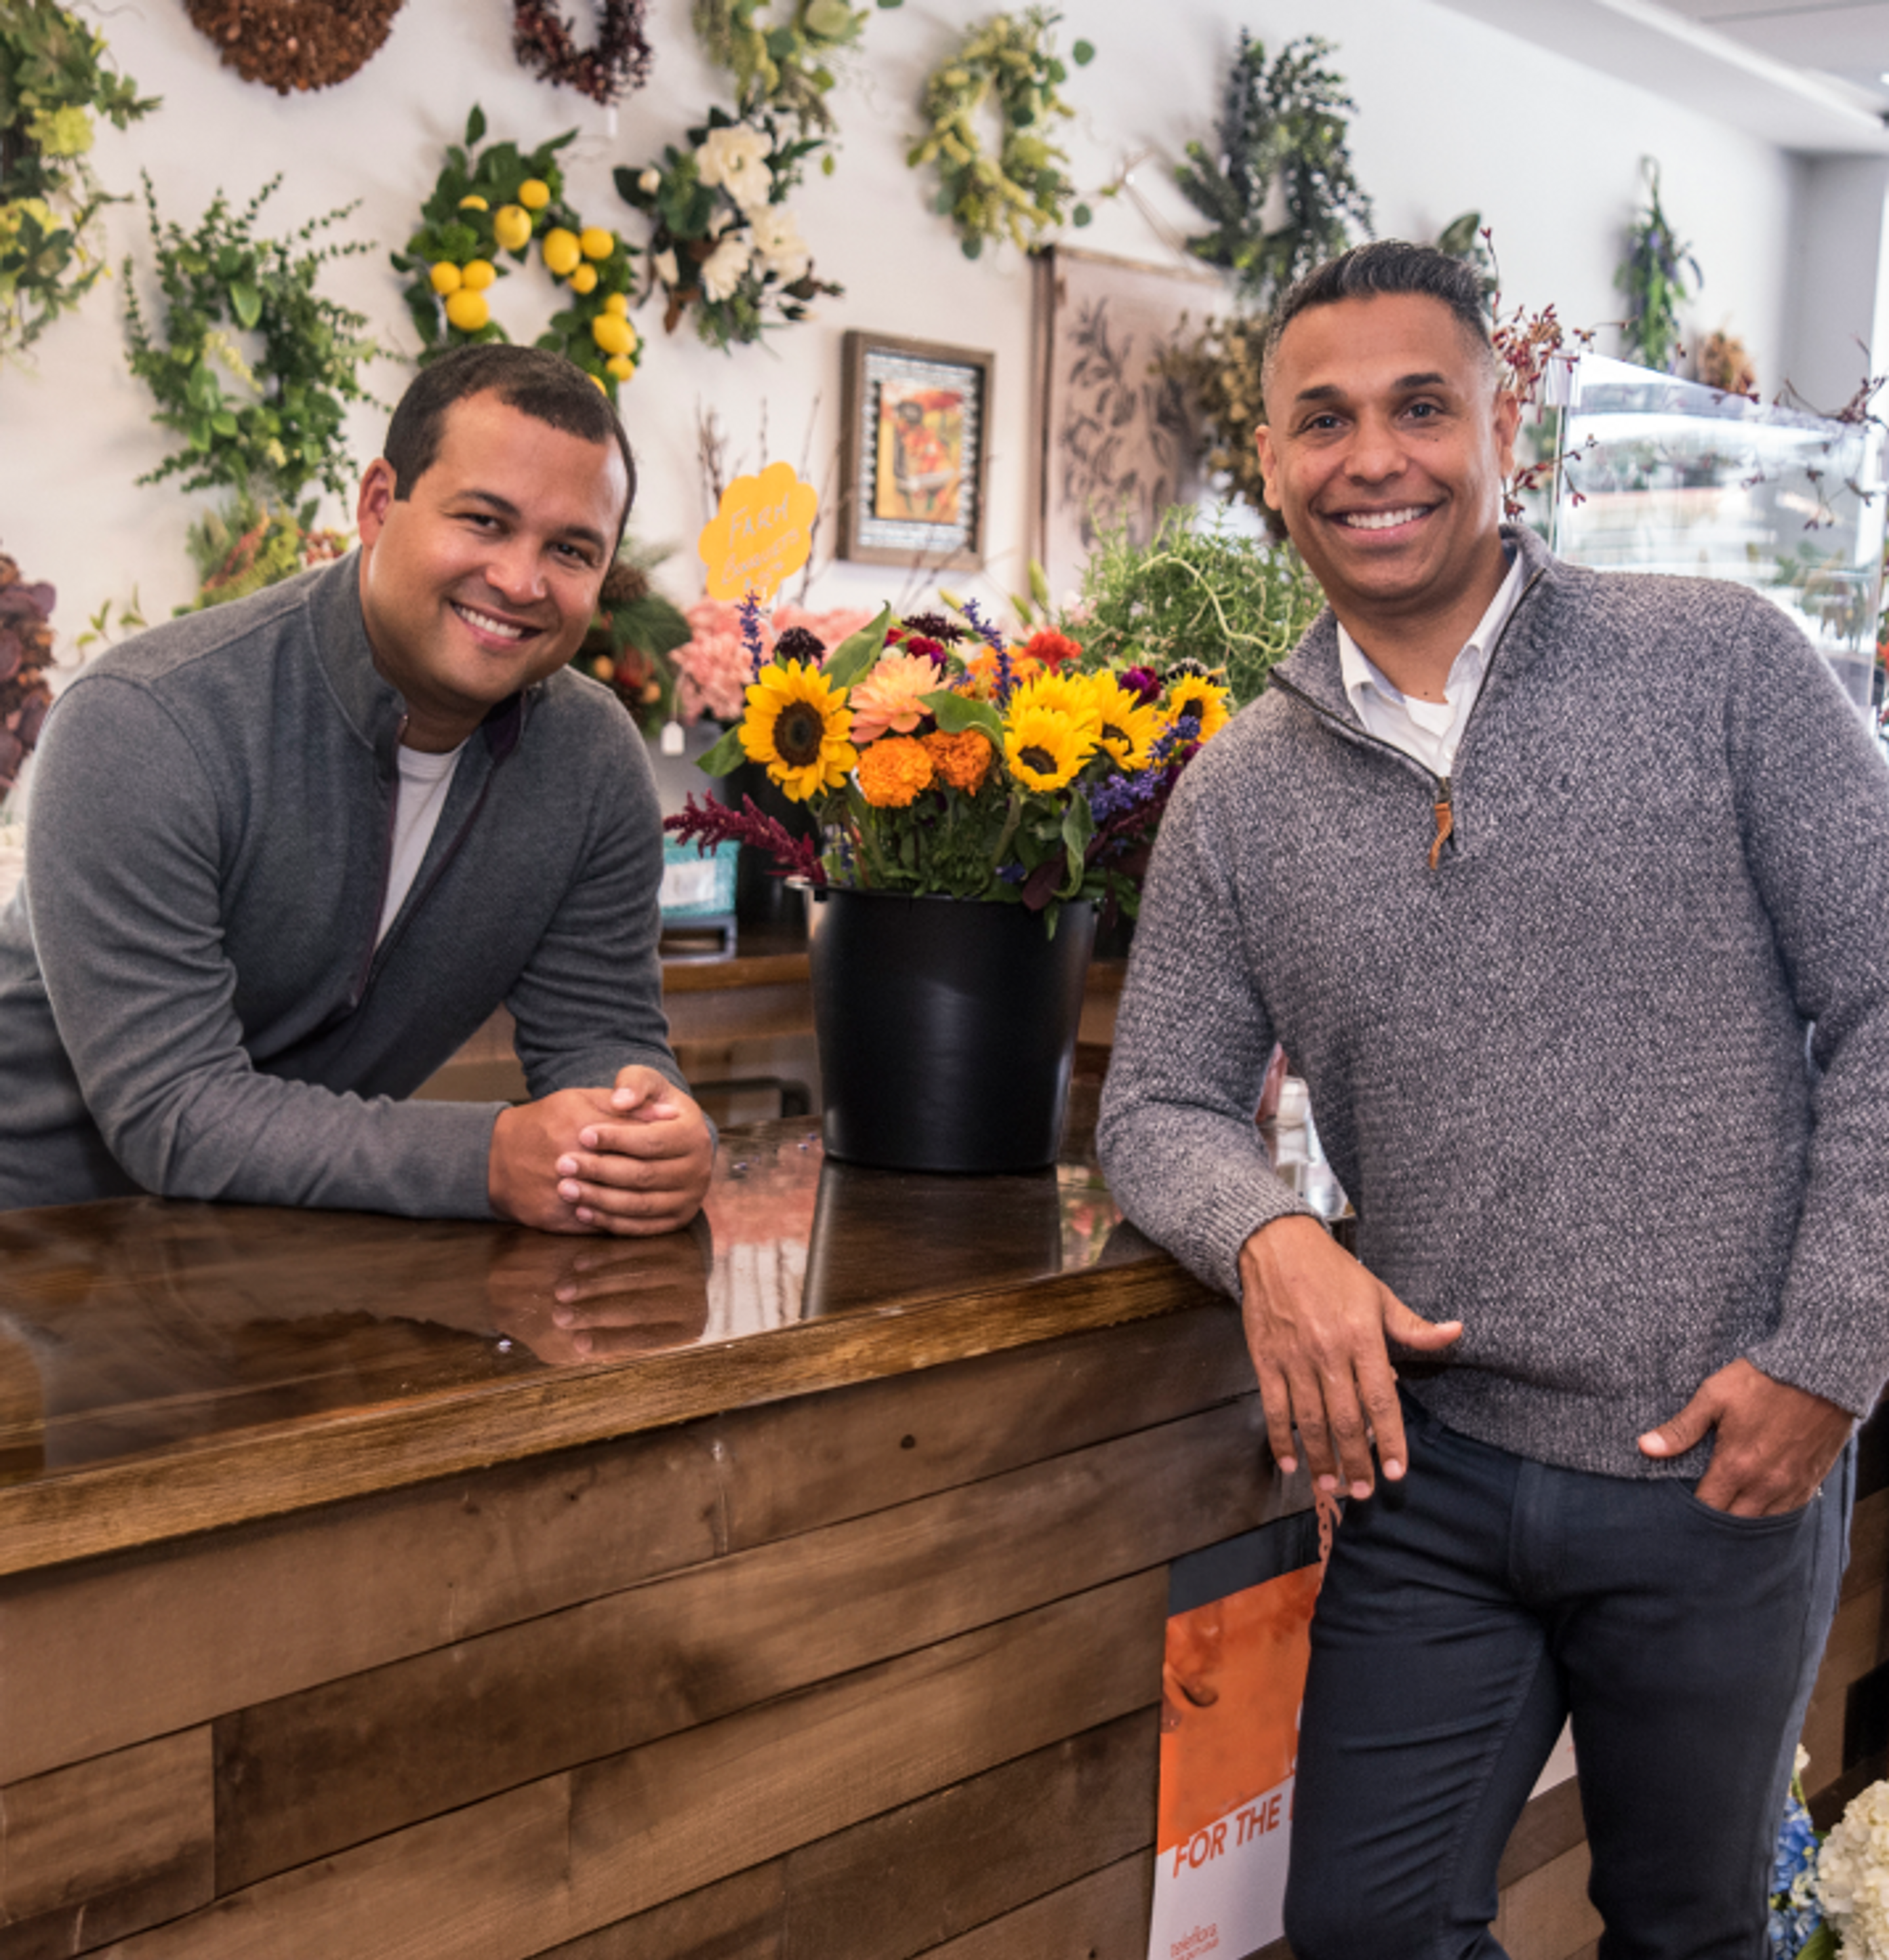 Co-ceo, Co-Founders Ken and Joe at a Flower Shop. Bright yellow sunflowers in background.